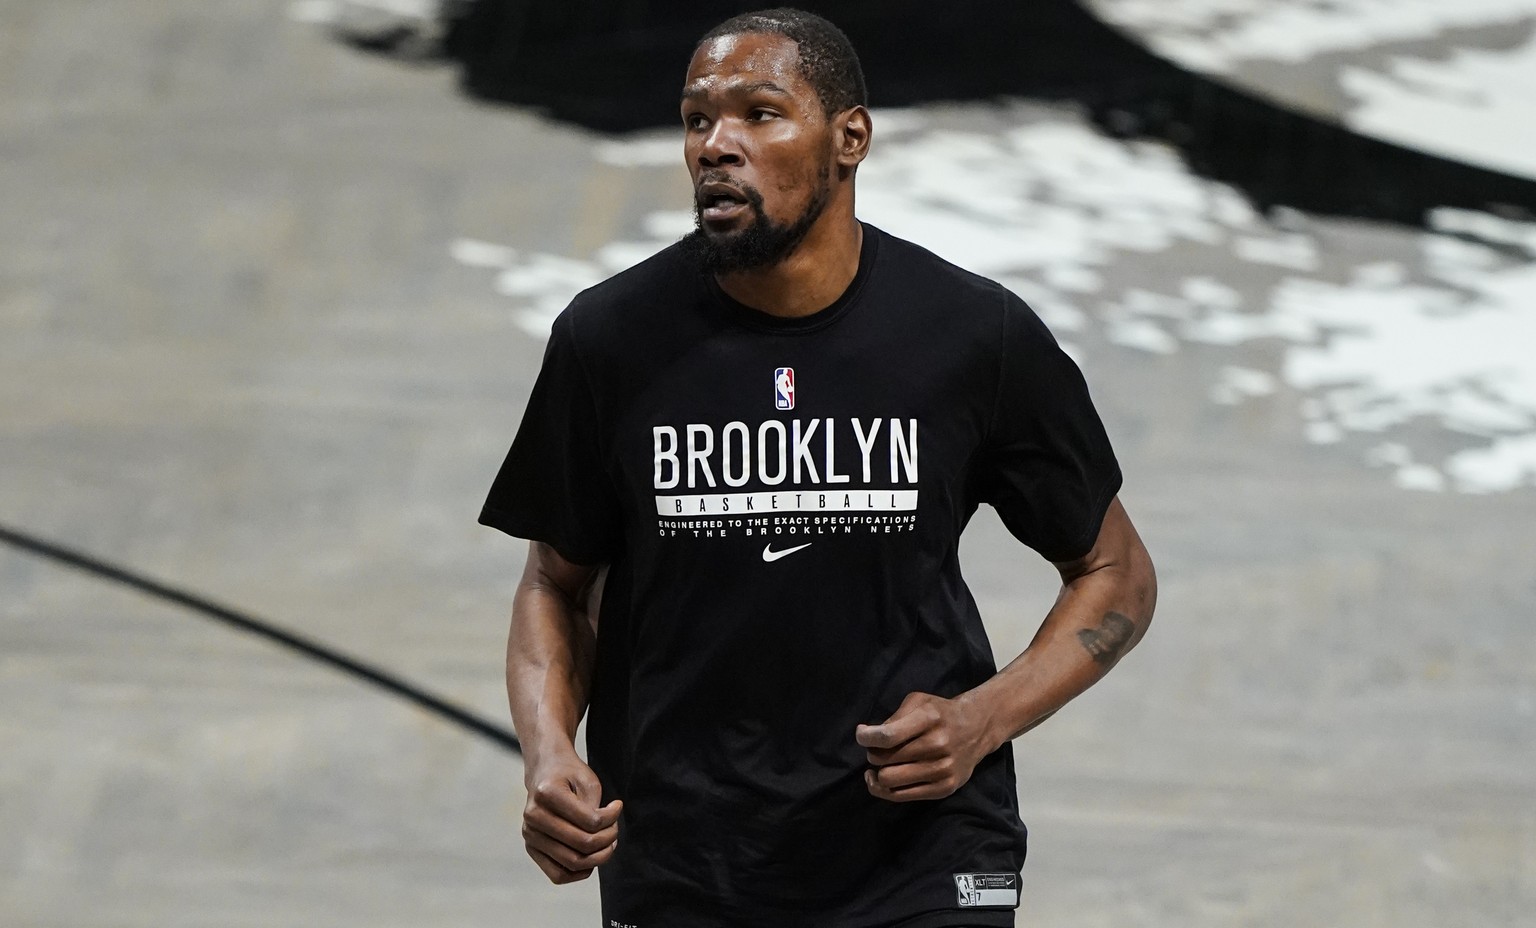 Brooklyn Nets&#039; Kevin Durant works out before an NBA basketball game against the New Orleans Pelicans Wednesday, April 7, 2021, in New York. (AP Photo/Frank Franklin II)